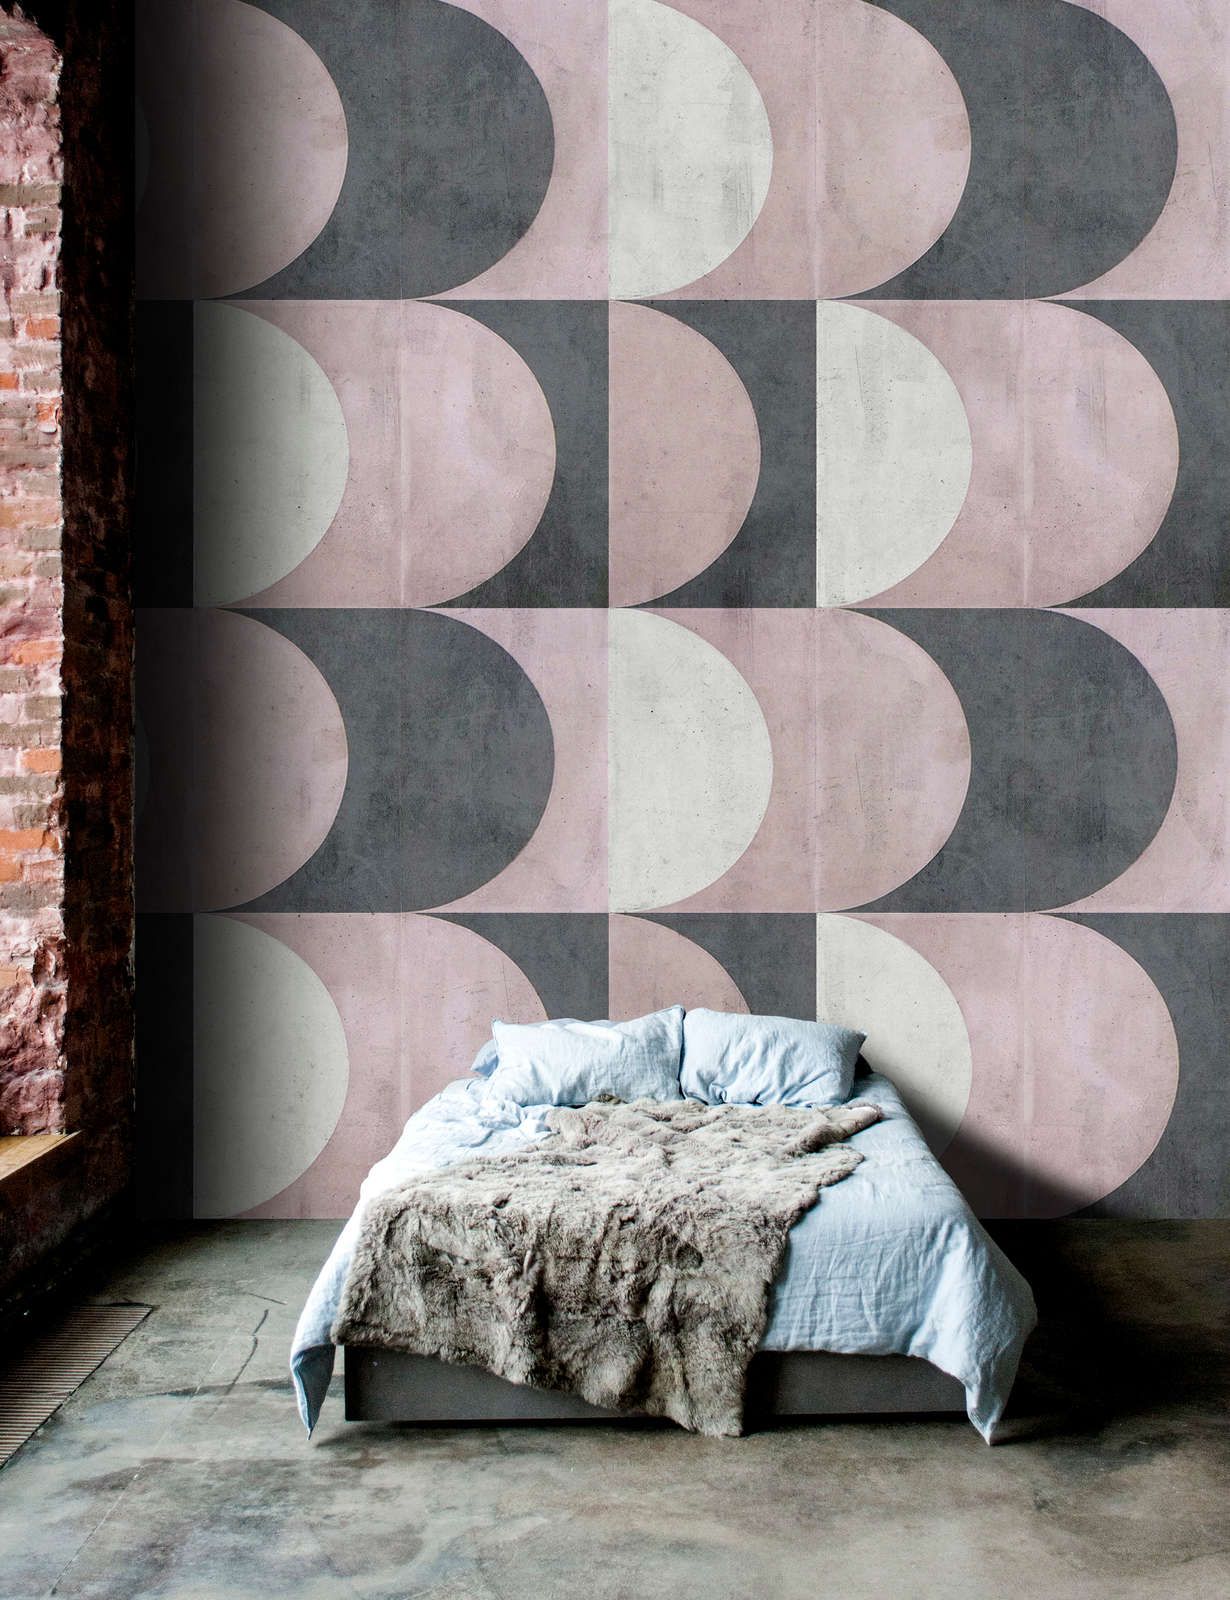             Photo wallpaper »julek 1« - retro pattern in concrete look - grey, lilac | Smooth, slightly pearly shimmering non-woven fabric
        